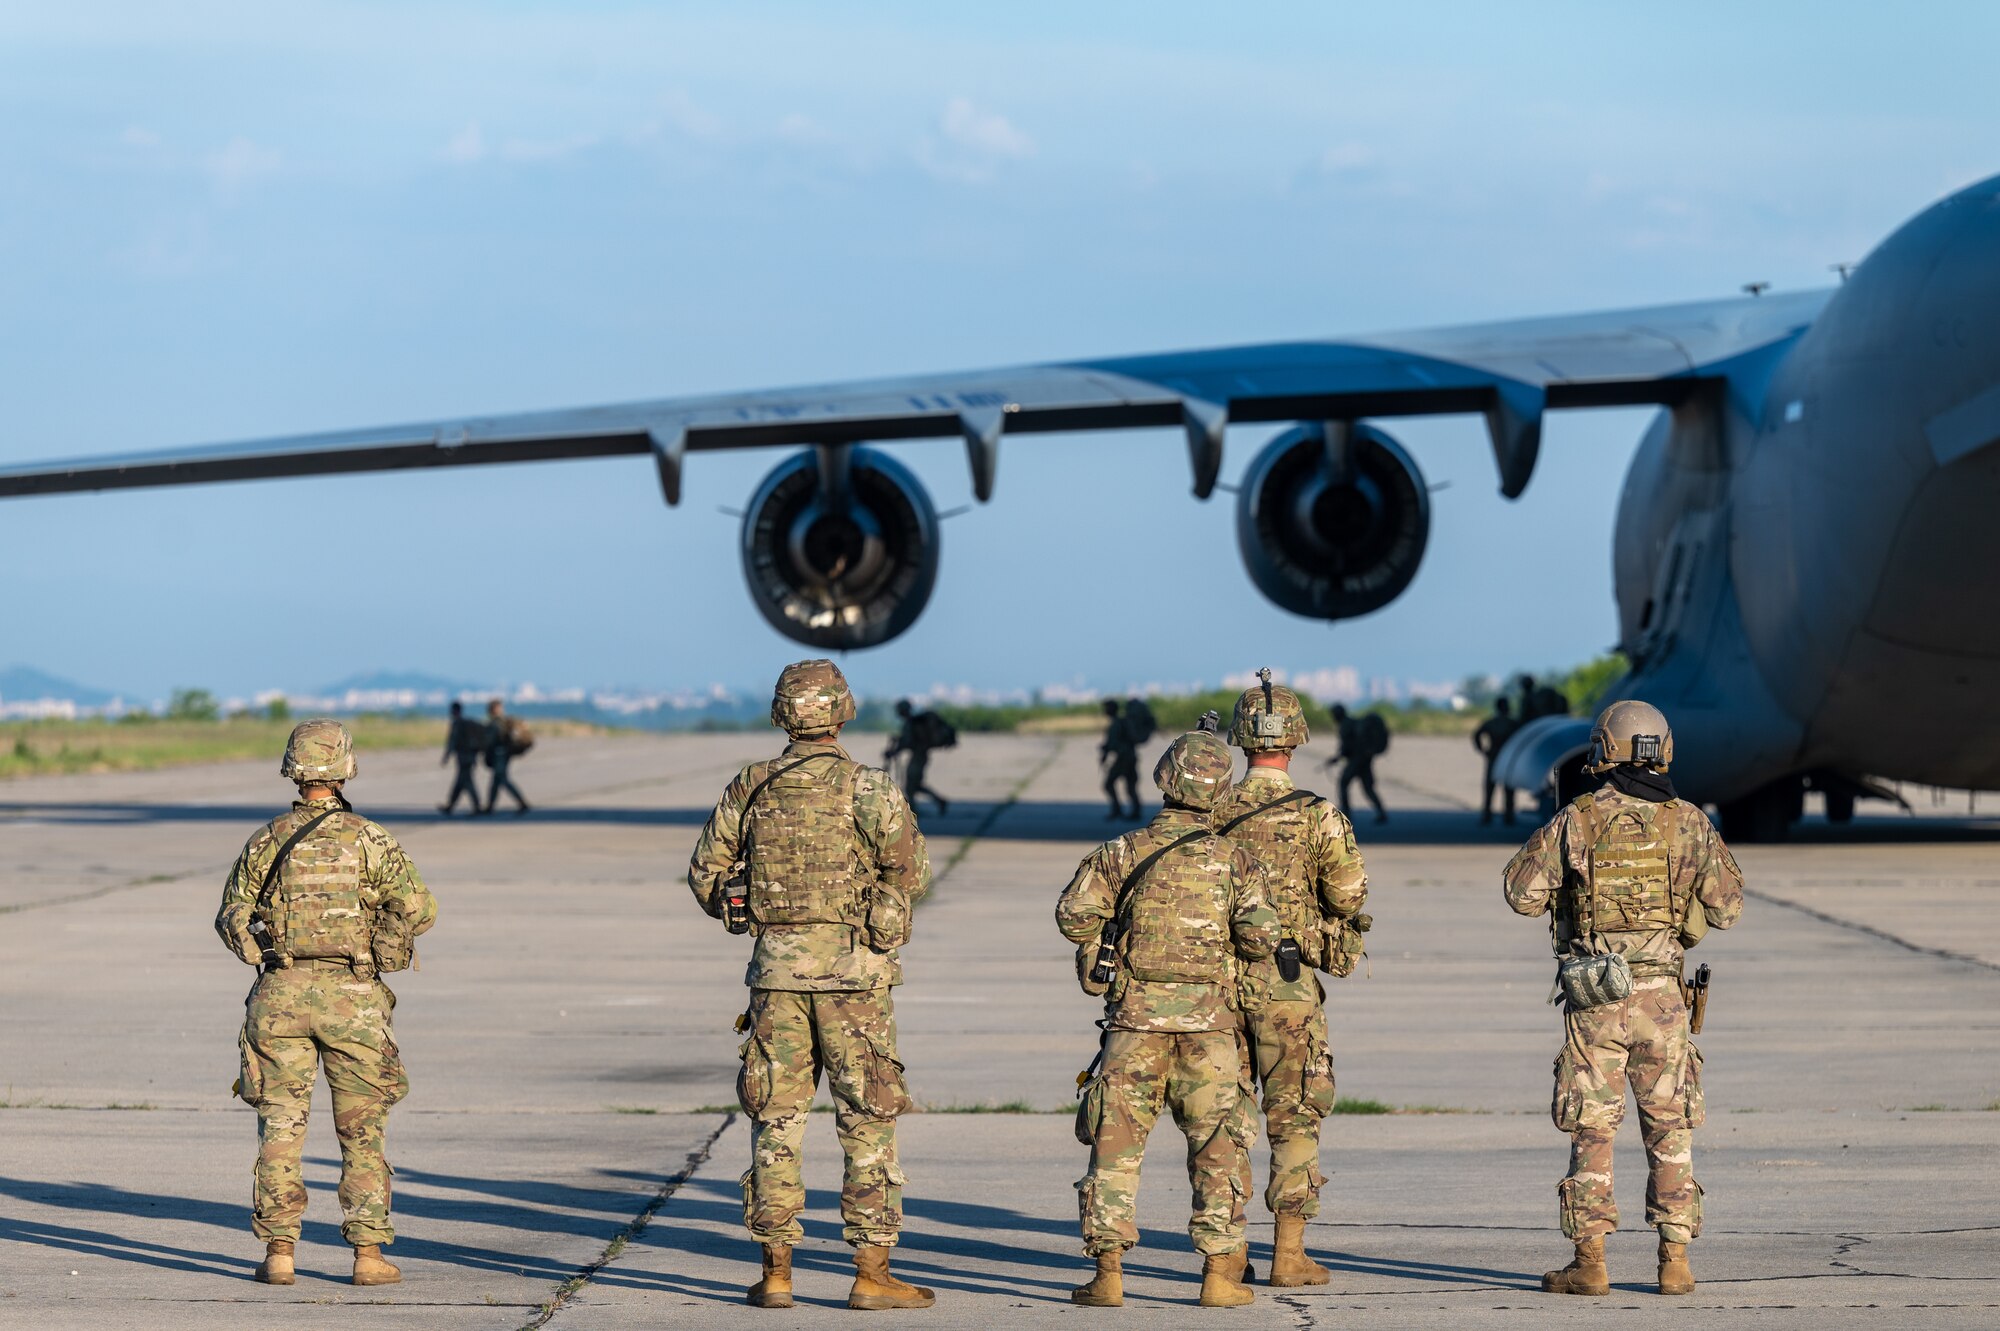 Airmen and Soldiers stand next to an aircraft on an airfield.